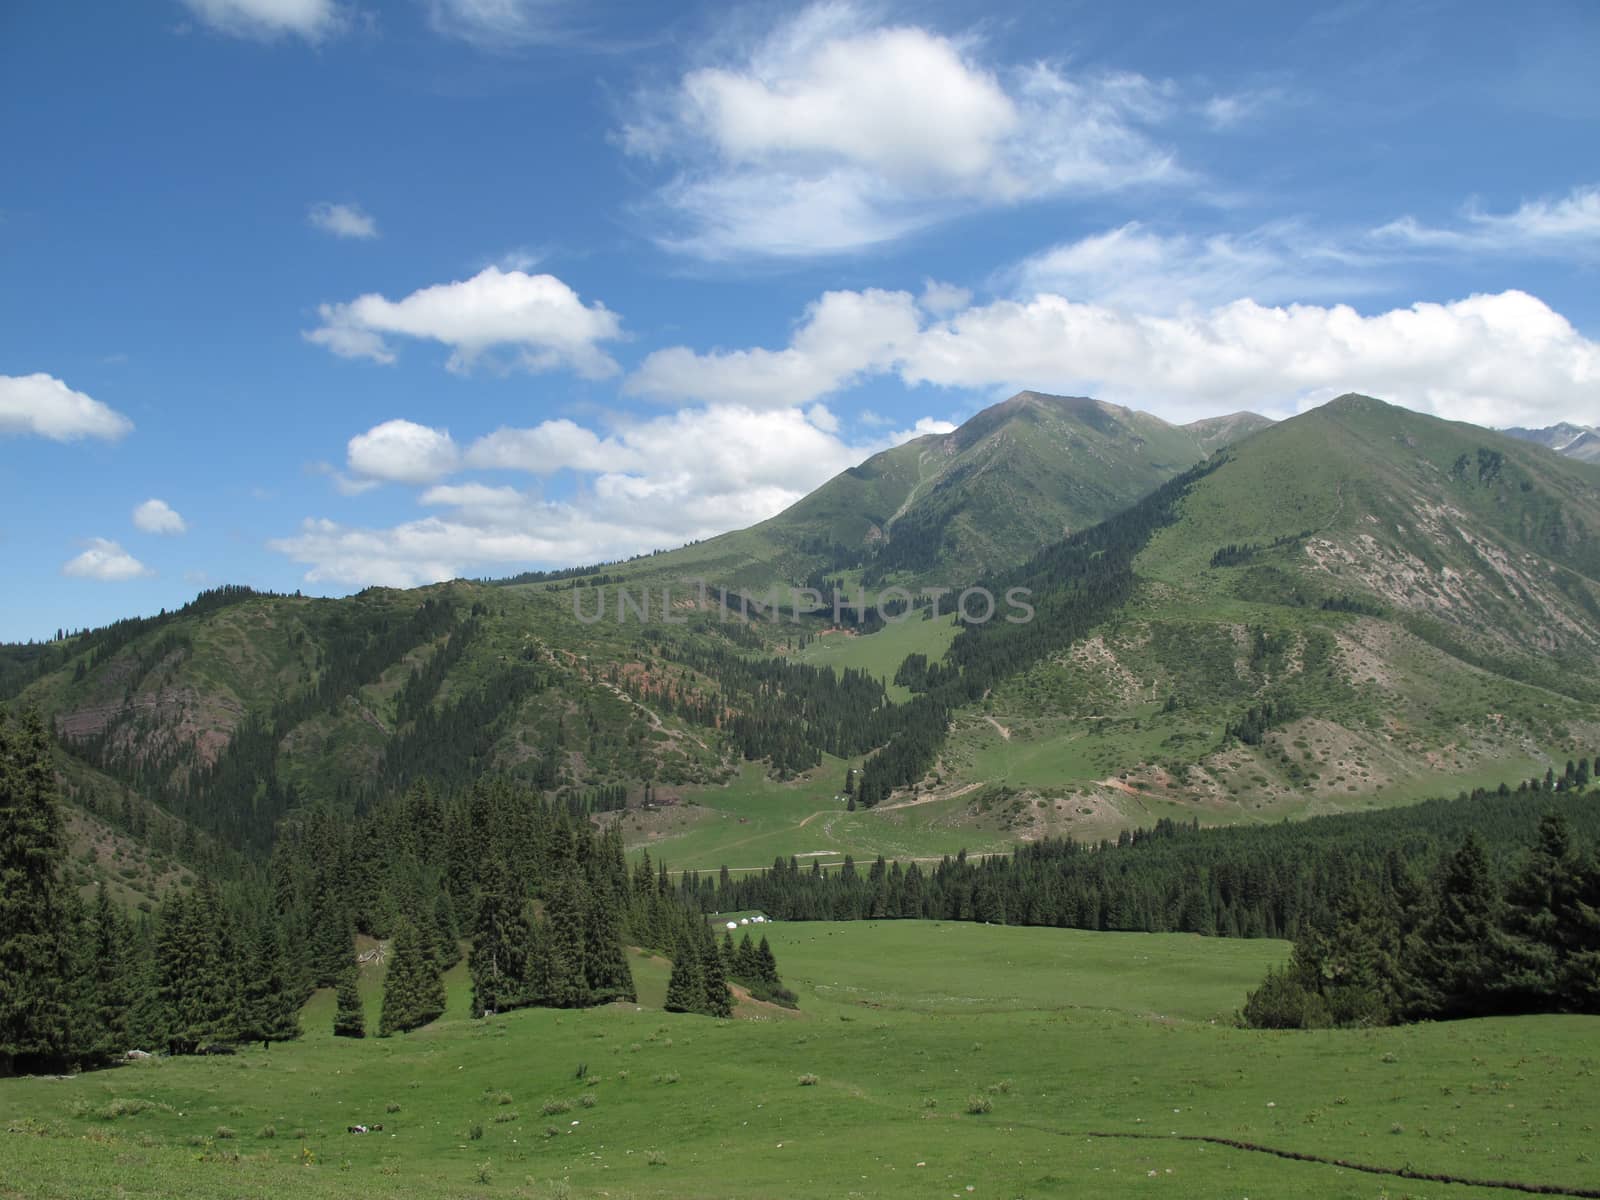 yurts in distant mountains and green trees                       